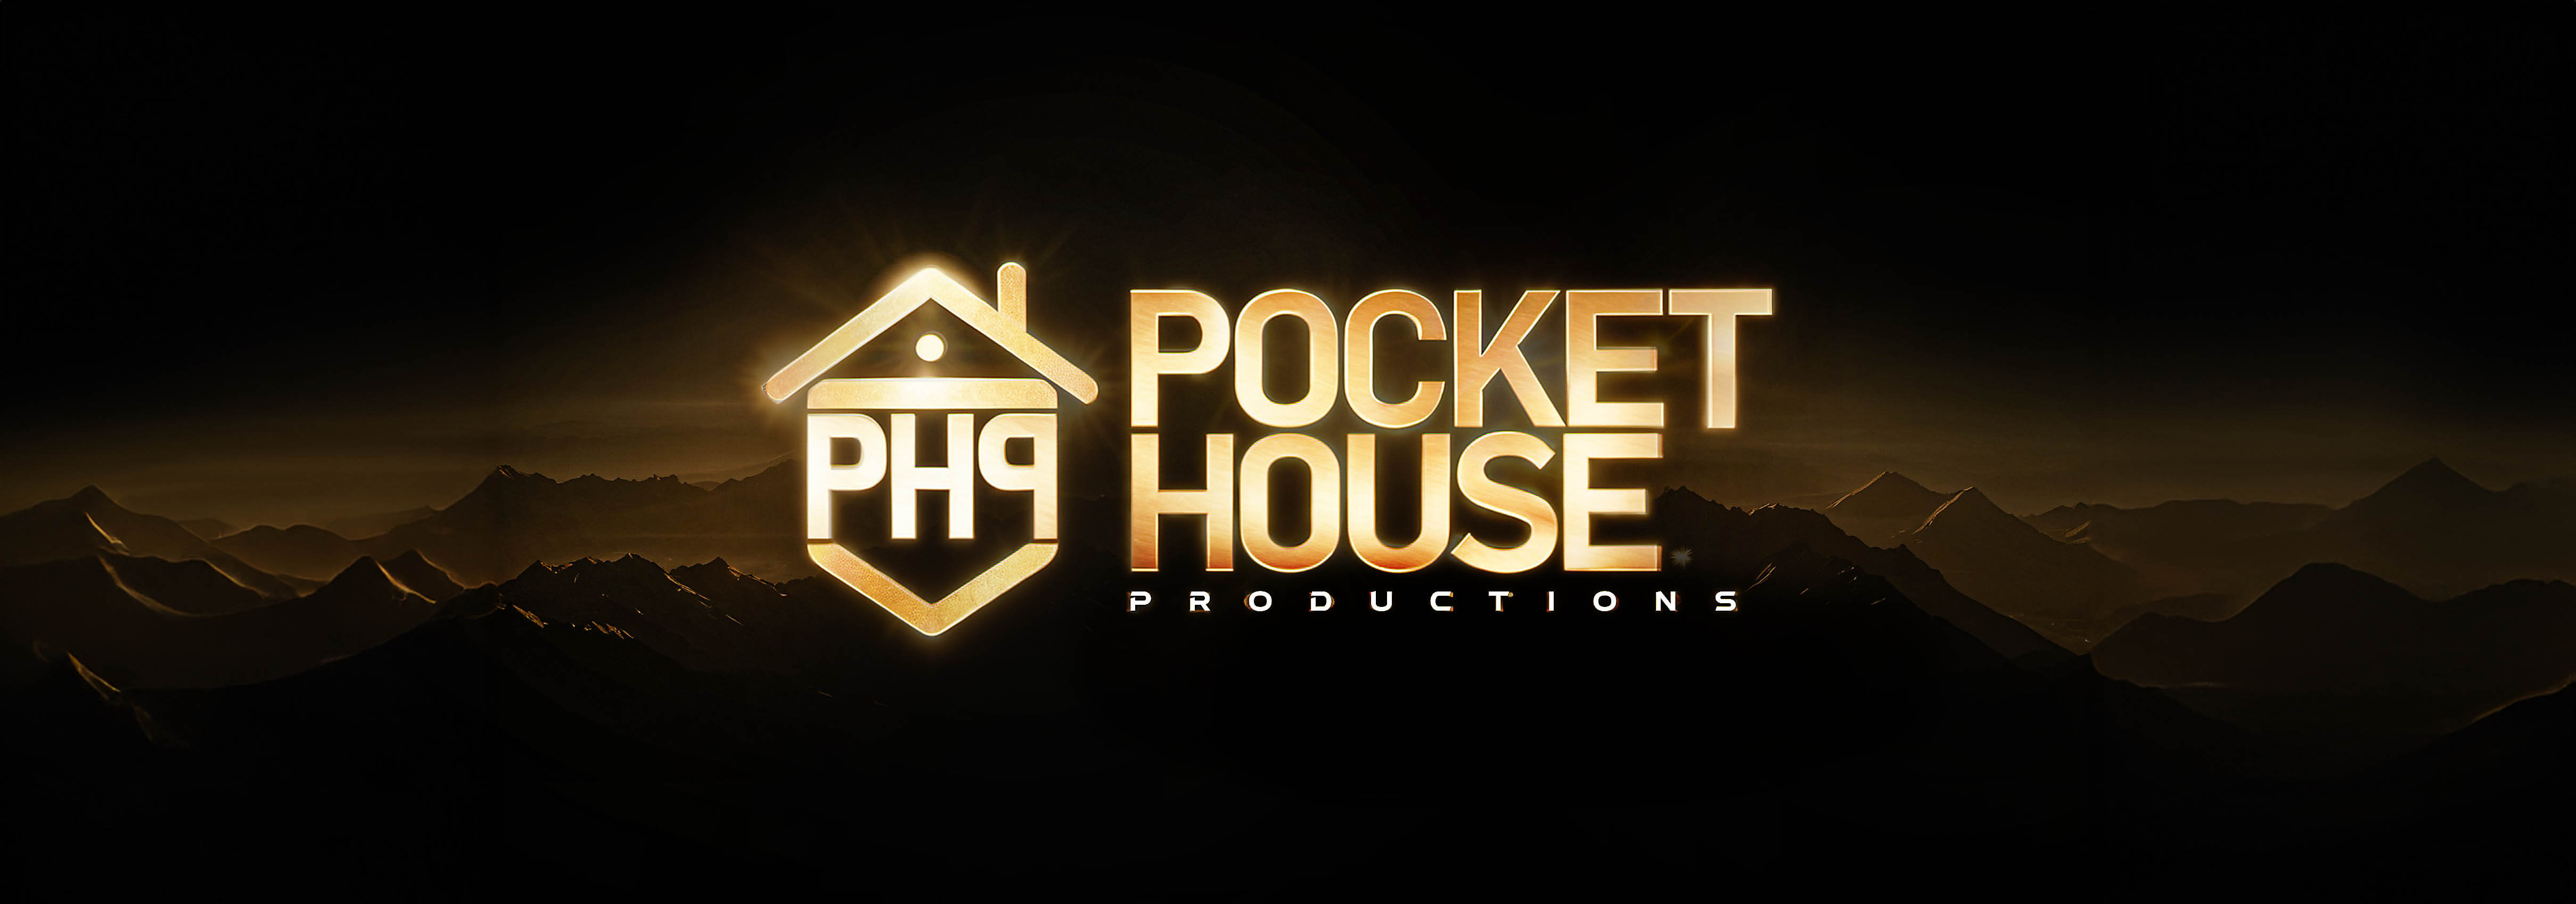 Pocket House Productions